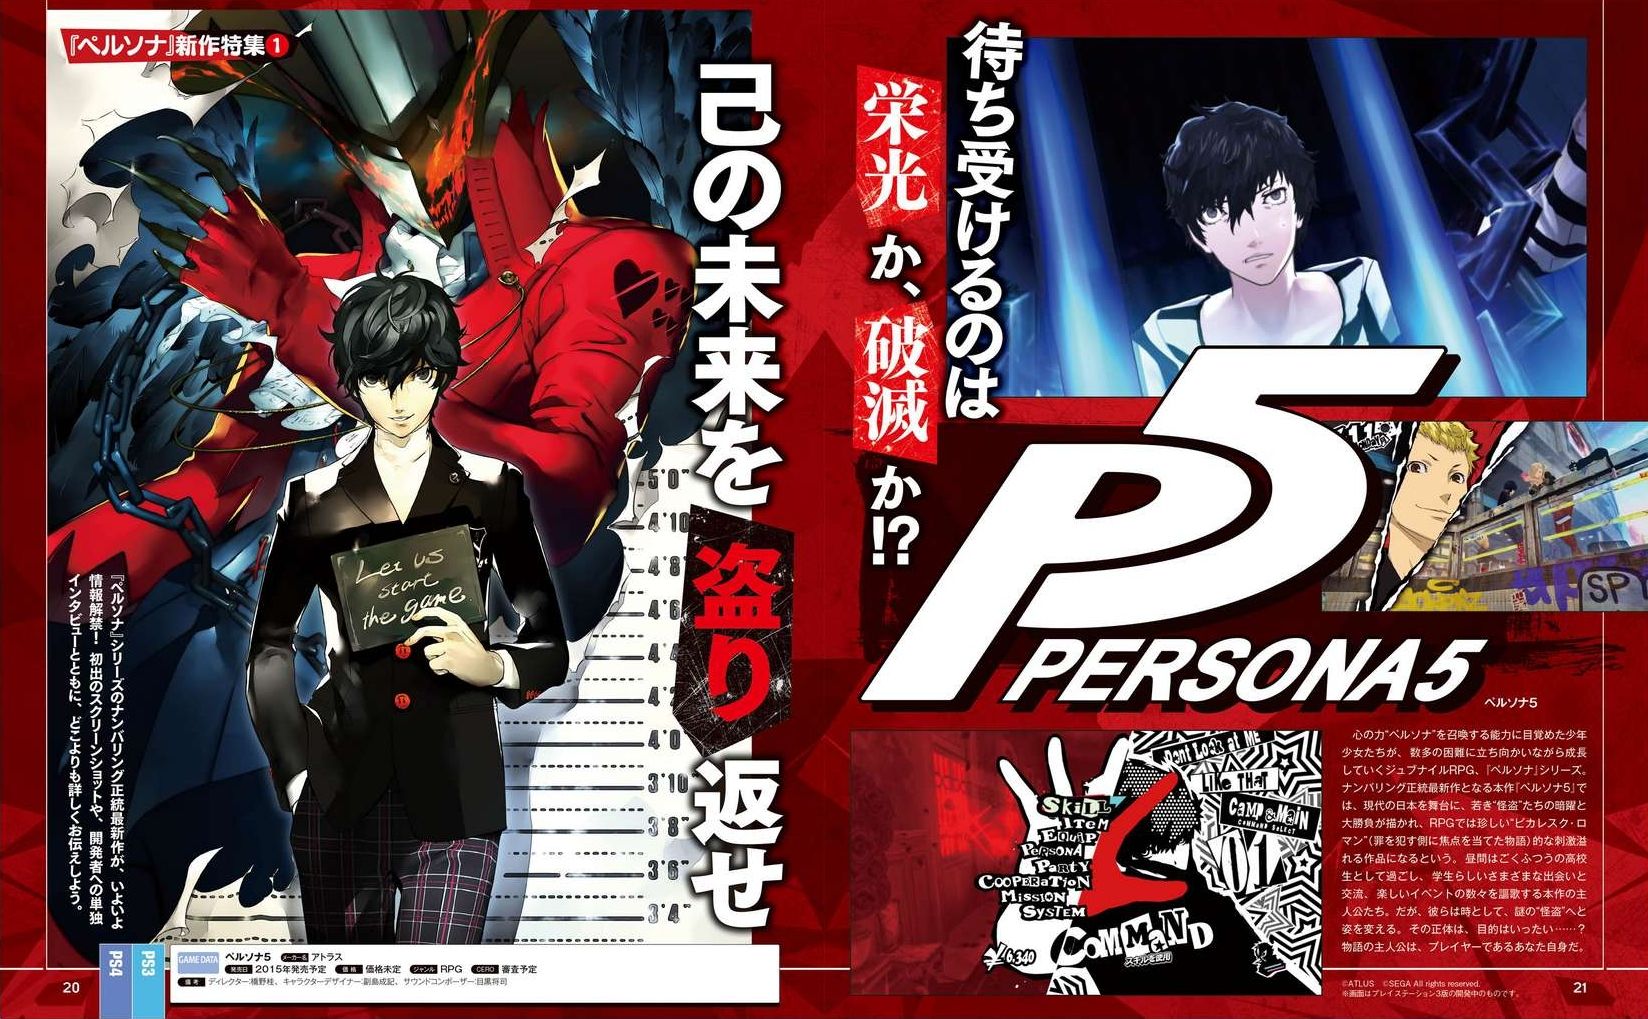 Luscious Scans for Playstation Exclusive JRPG Persona 5 Are Out, Check